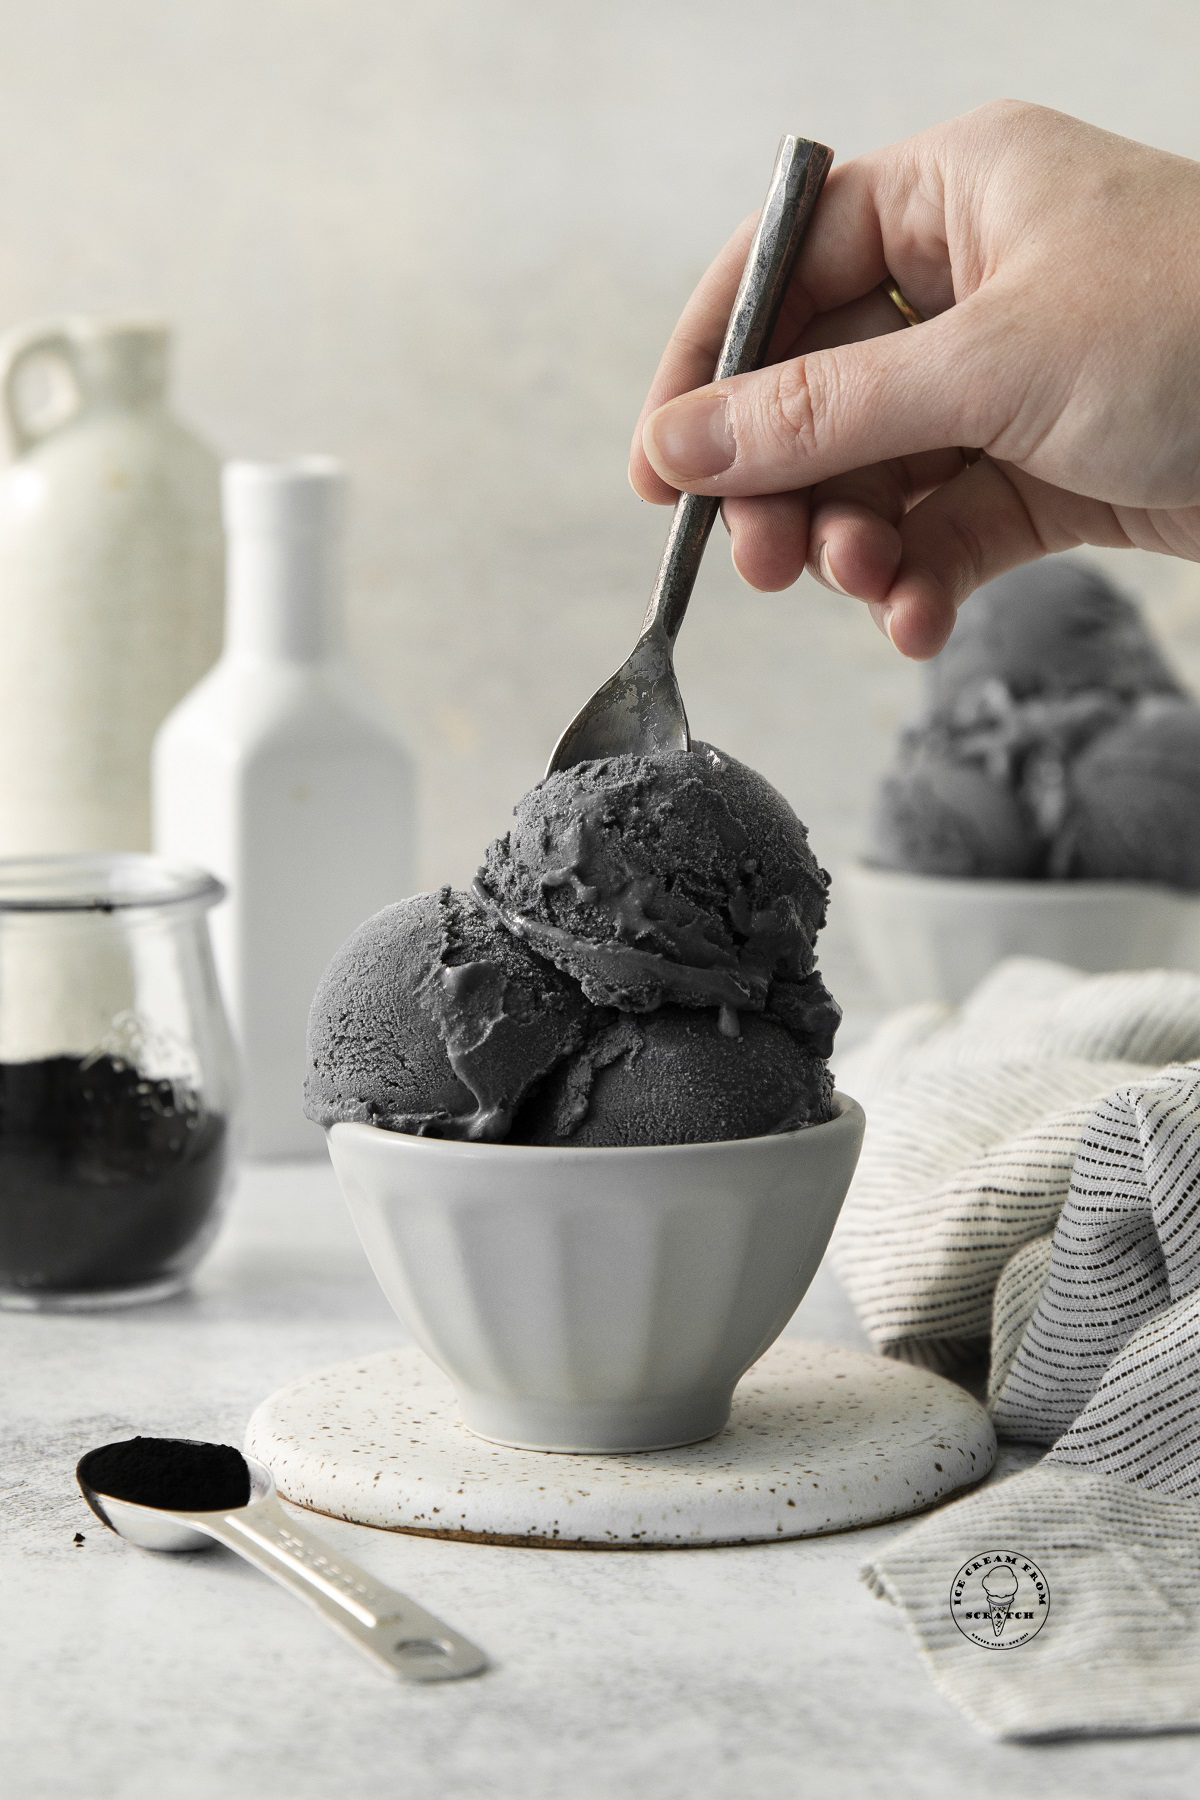 scoops of black ice cream in a bowl, a hand is eating it with a spoon.